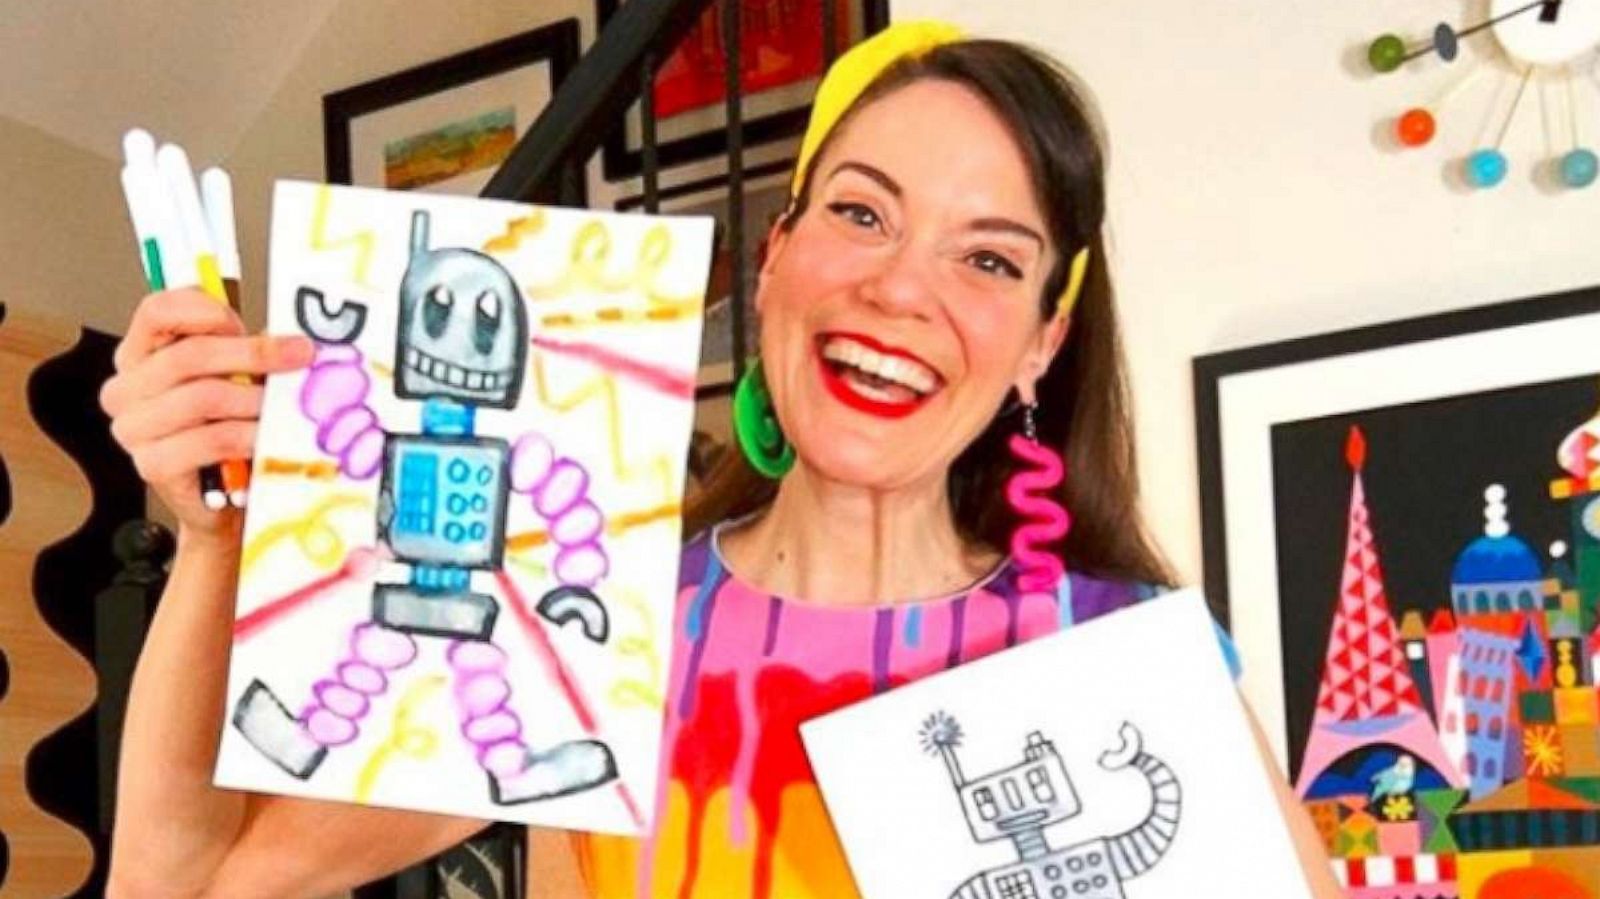 PHOTO: Thousands tuned in as elementary school art teacher Cassie Stephens demonstrated robot art projects for children in the Nashville, Tennessee-area, who are quarantined during the COVID-19 outbreak.